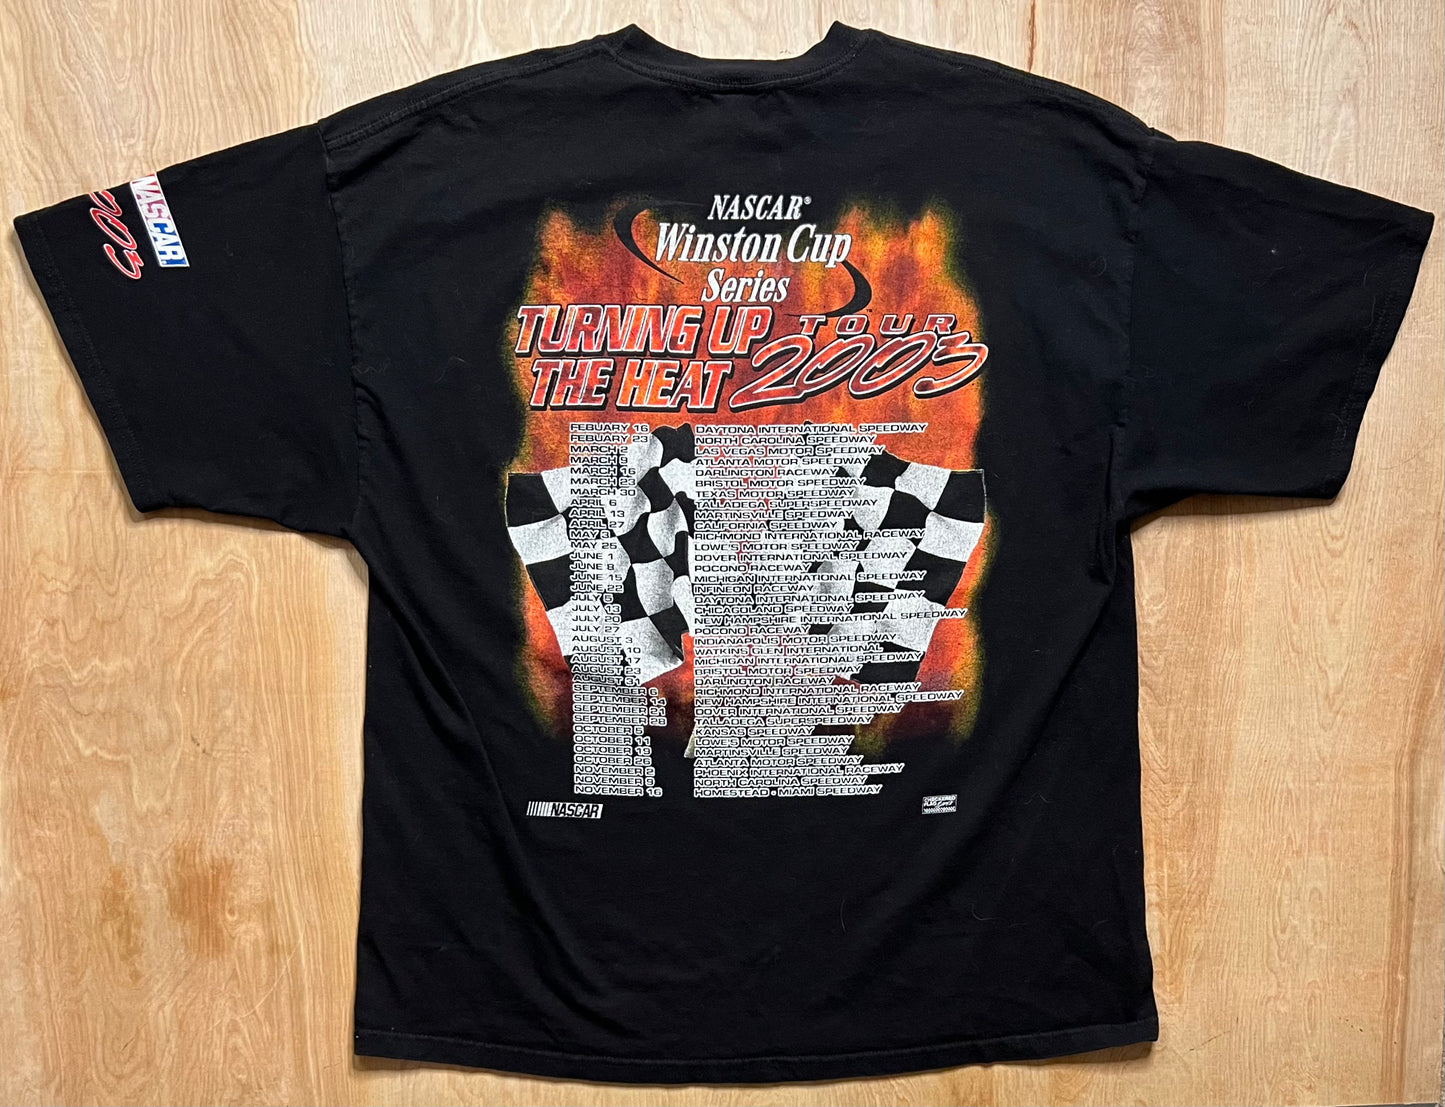 2003 "Turn up the Heat" Nascar Winston Cup Series T-Shirt